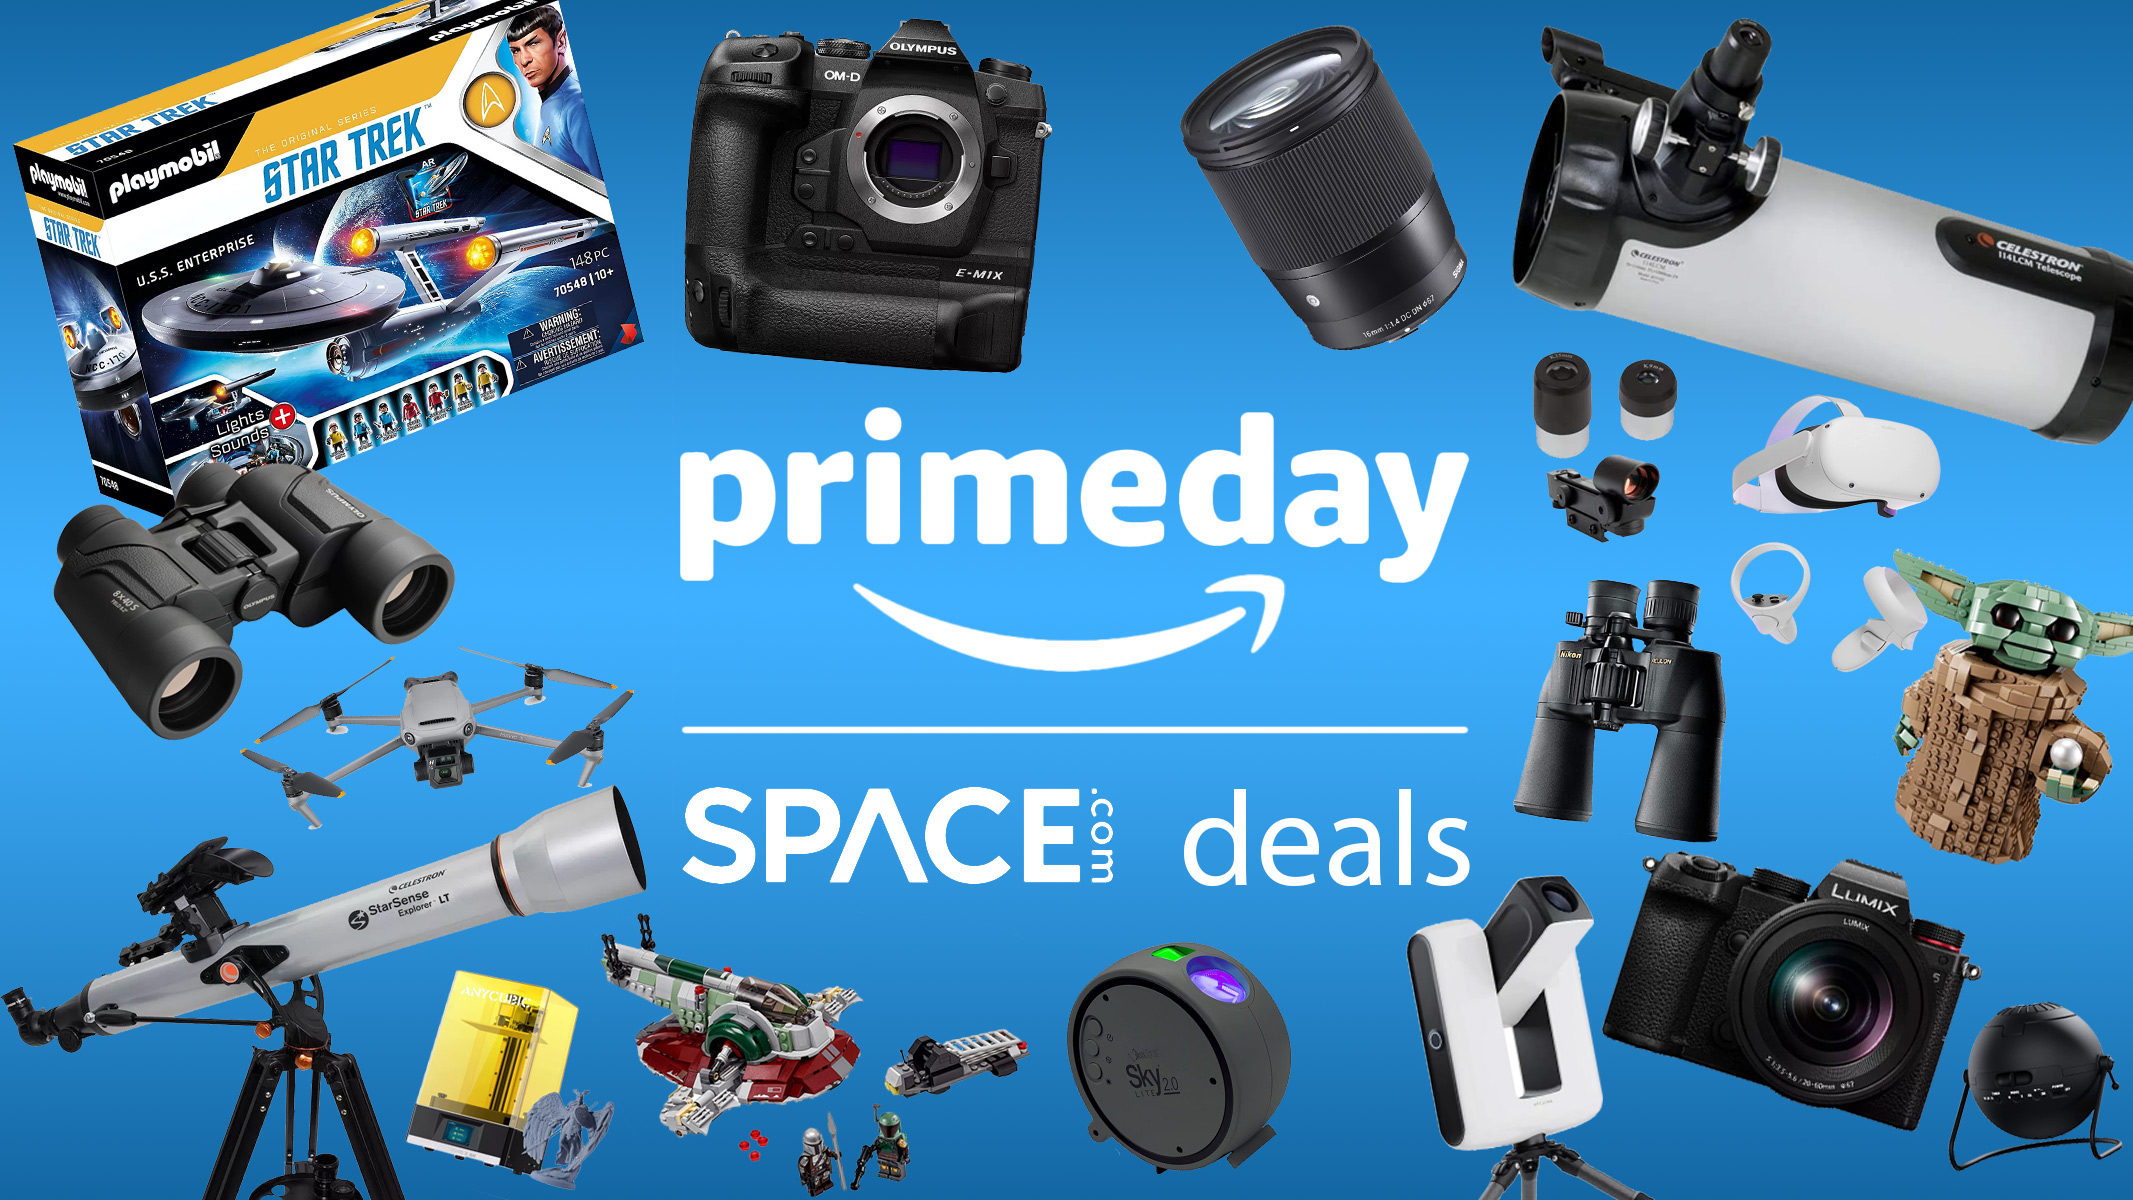 Check Out These Great Best Buy Counter Deals to October Prime Day